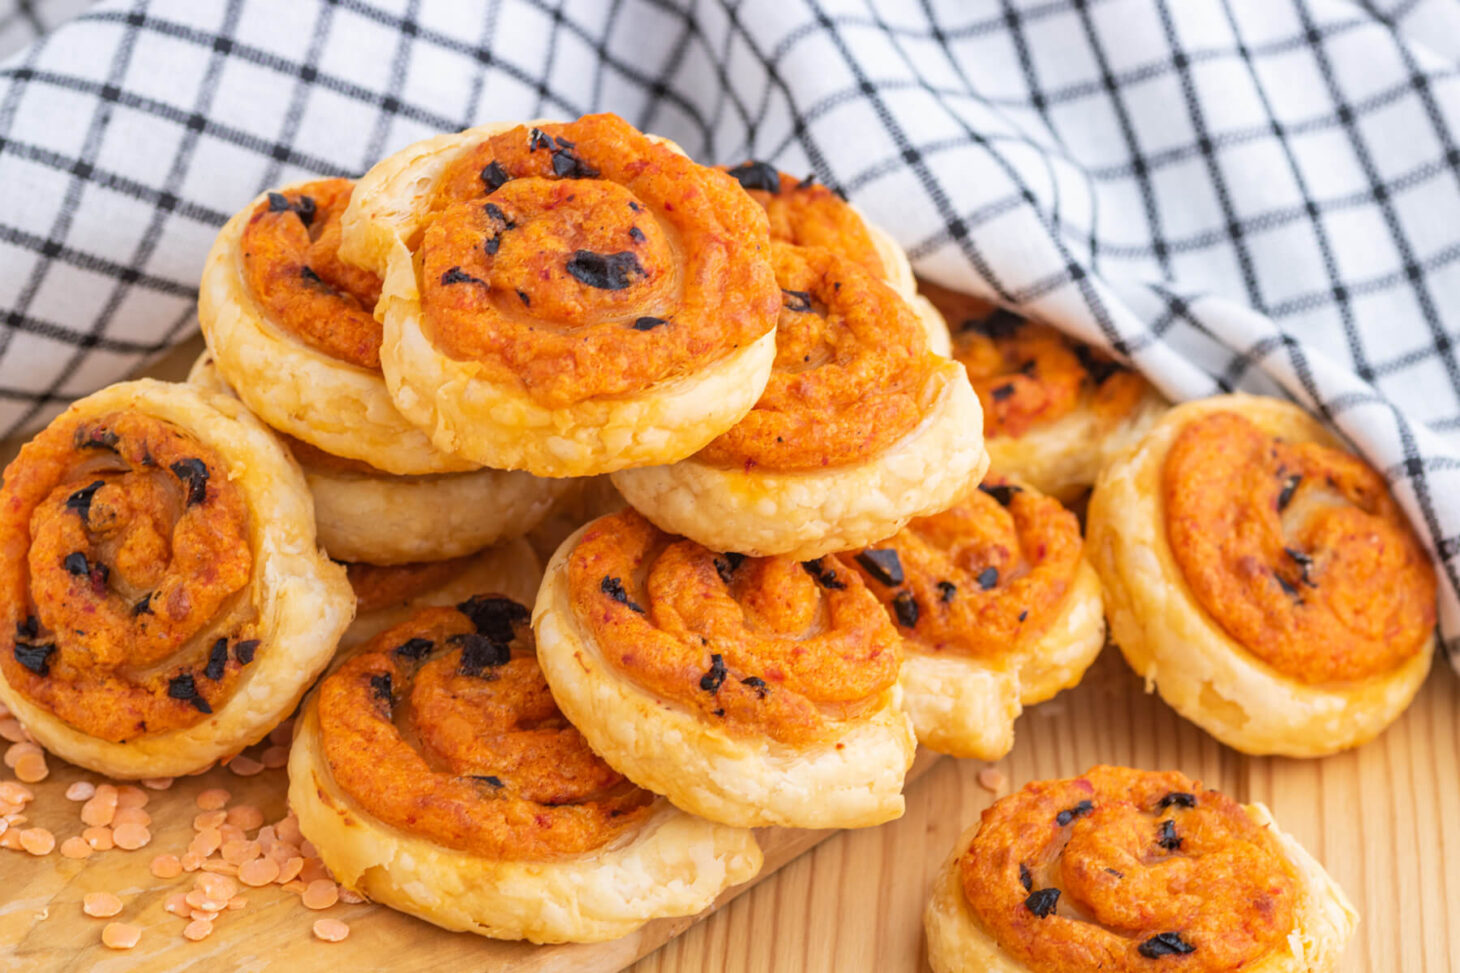 A pile of golden baked puff pastry pinwheels on a wooden board garnished with red lentils.